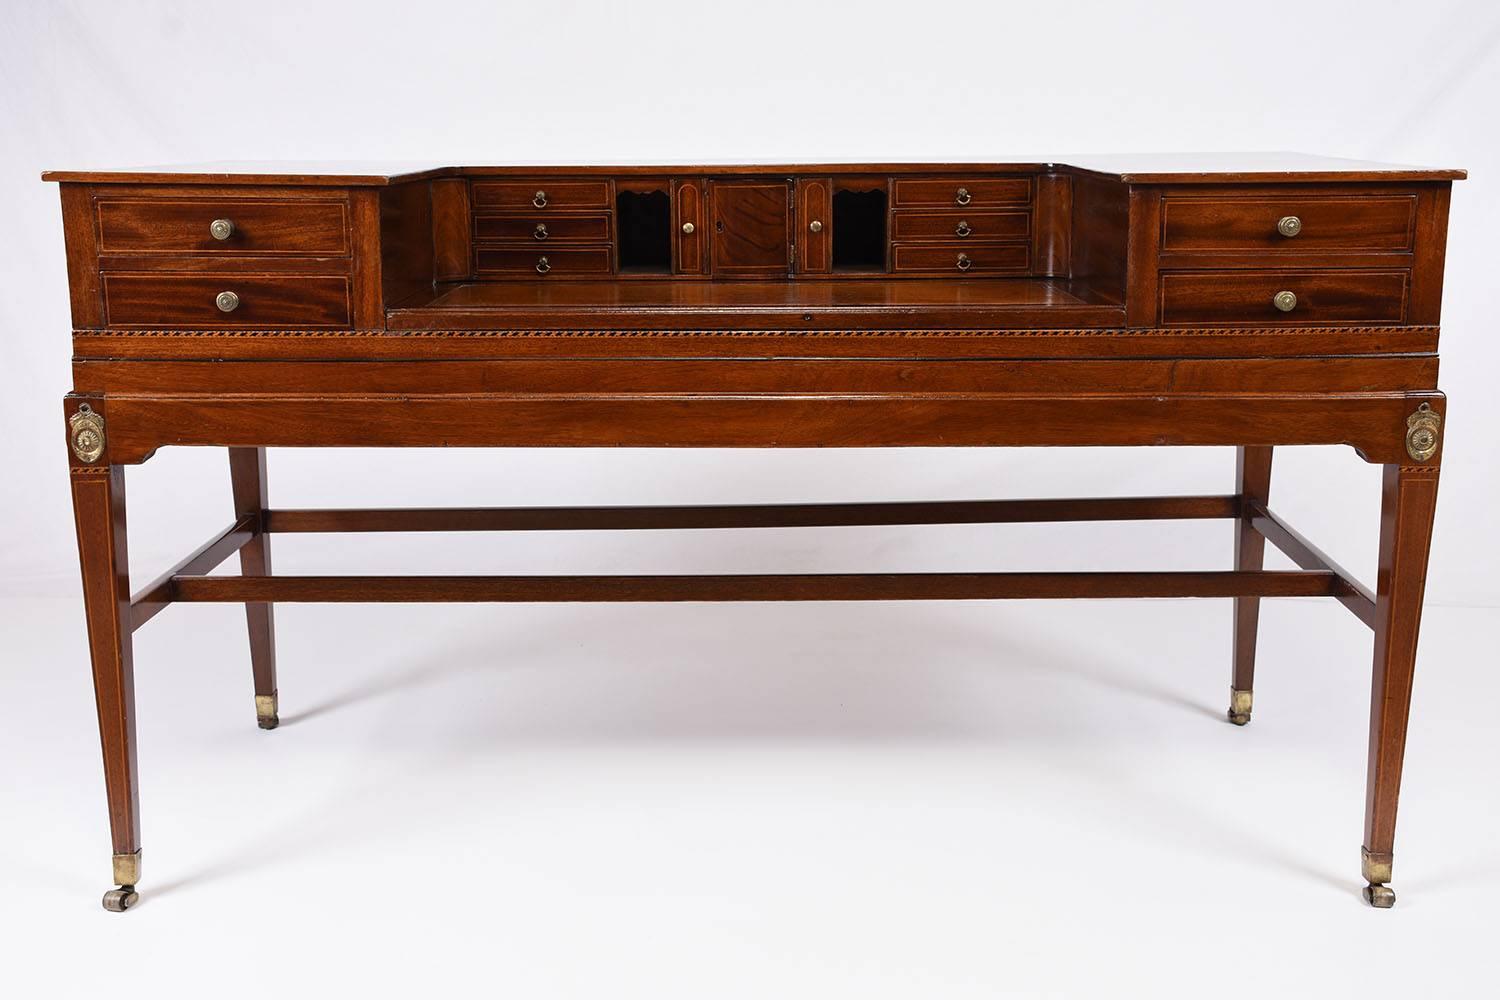 This 1850s antique George III-style Carlton house desk is made of mahogany wood that features its original stain and a new lacquer finish. The writing area is embossed with the original tan colored leather. There are two large drawers on either side